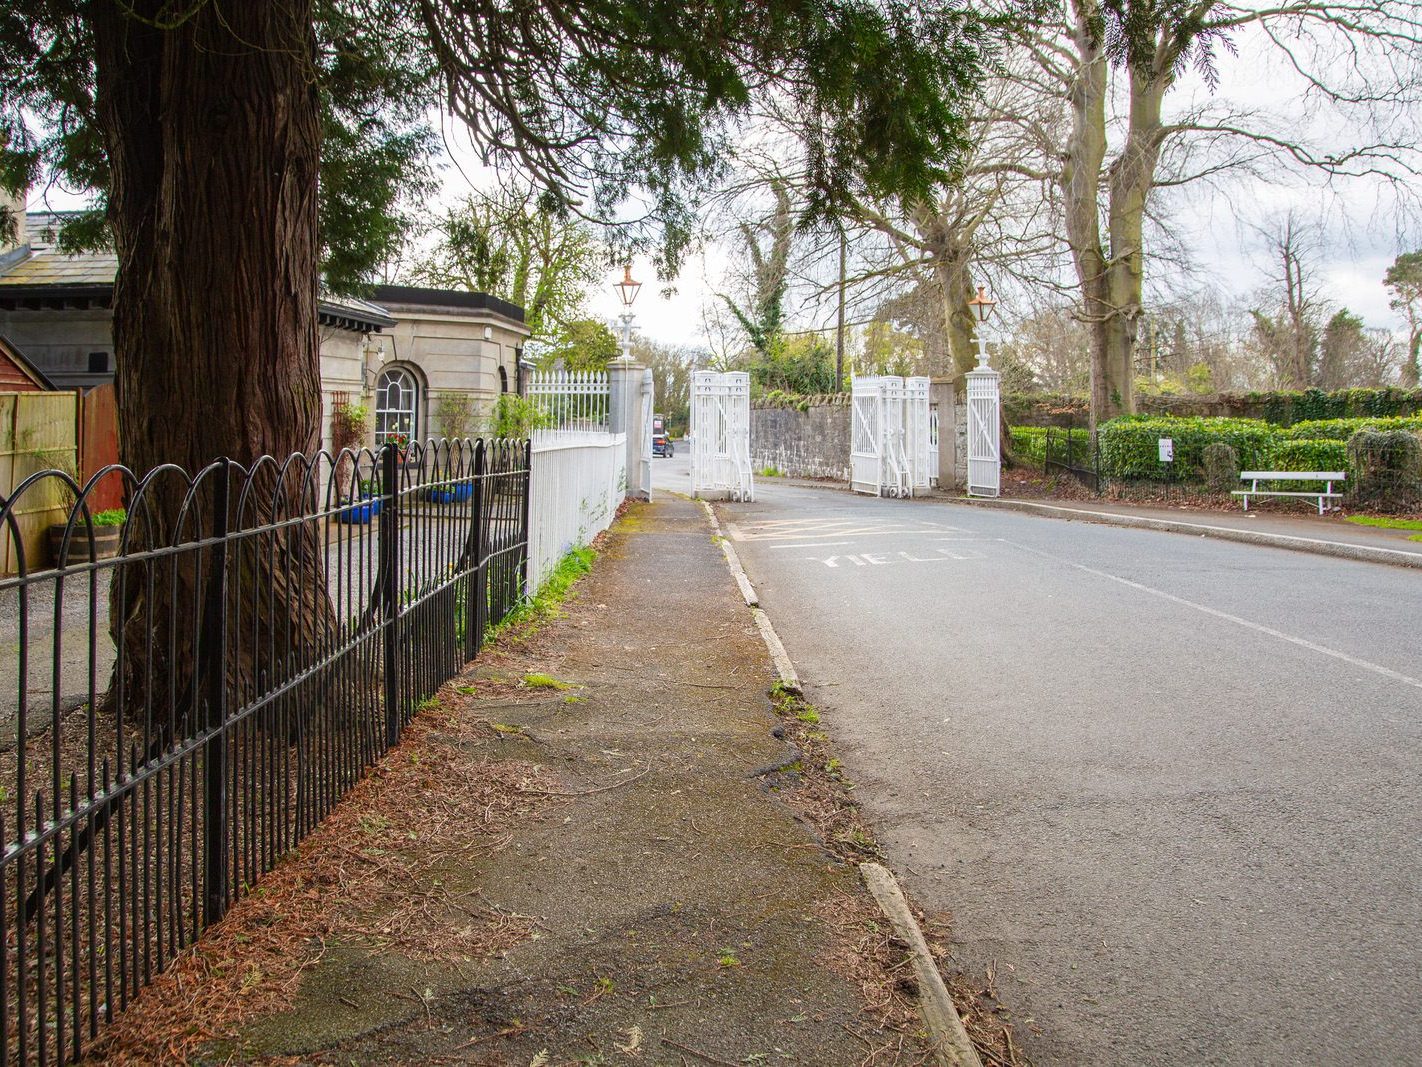 KNOCKMAROON GATE LODGE PHOENIX PARK [AND NEARBY]-223717-1